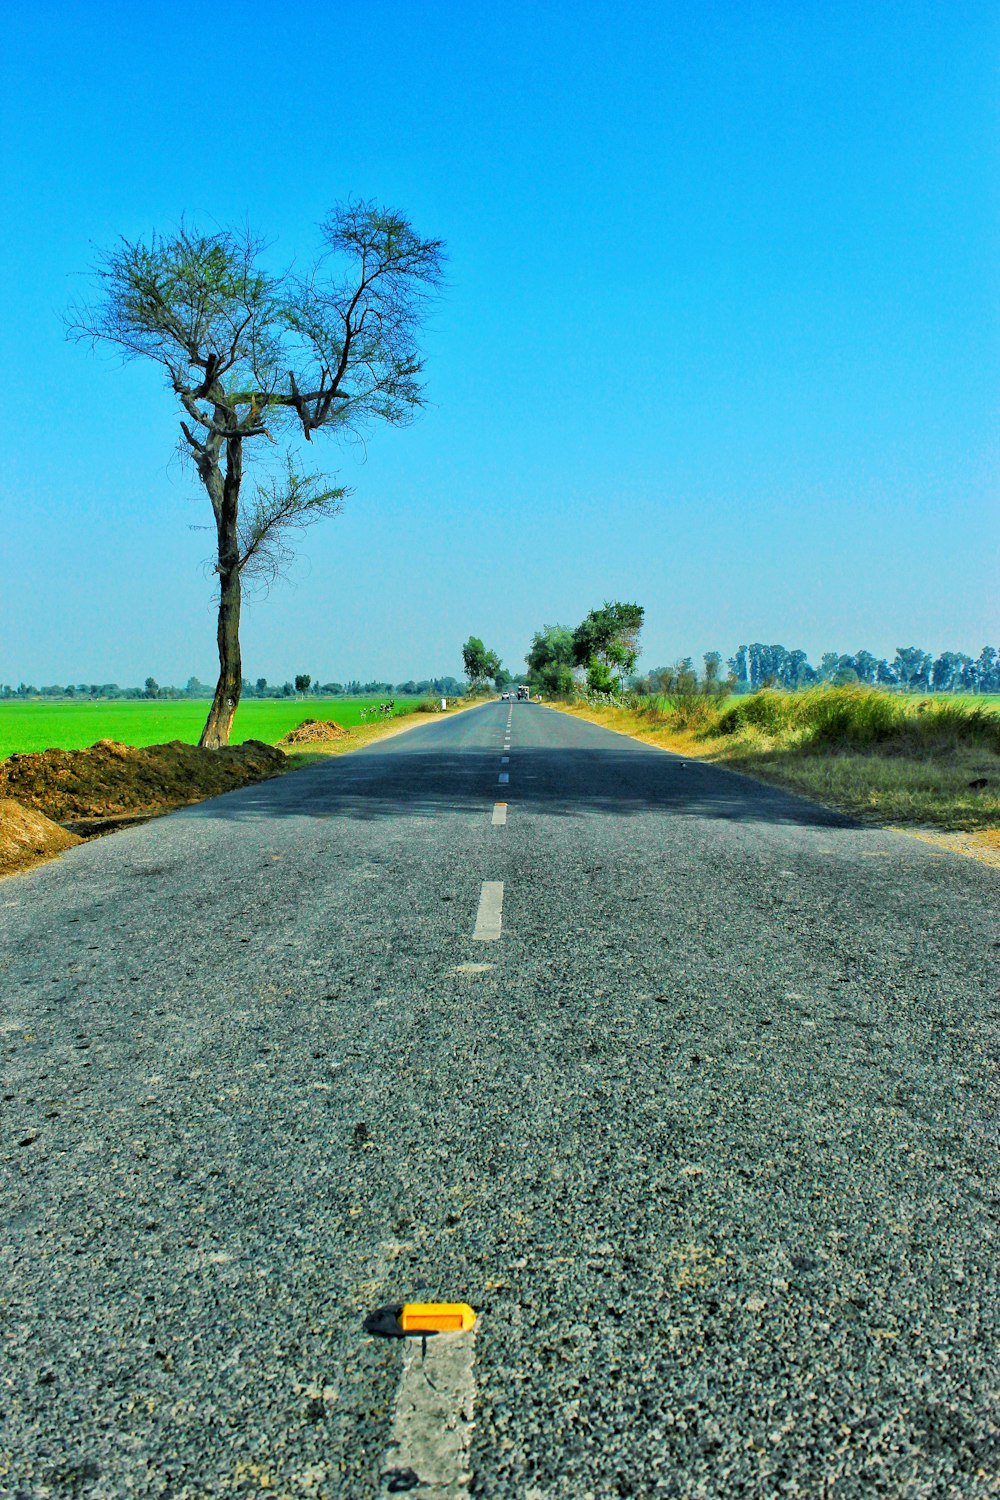 road in the middle of the field and trees during day